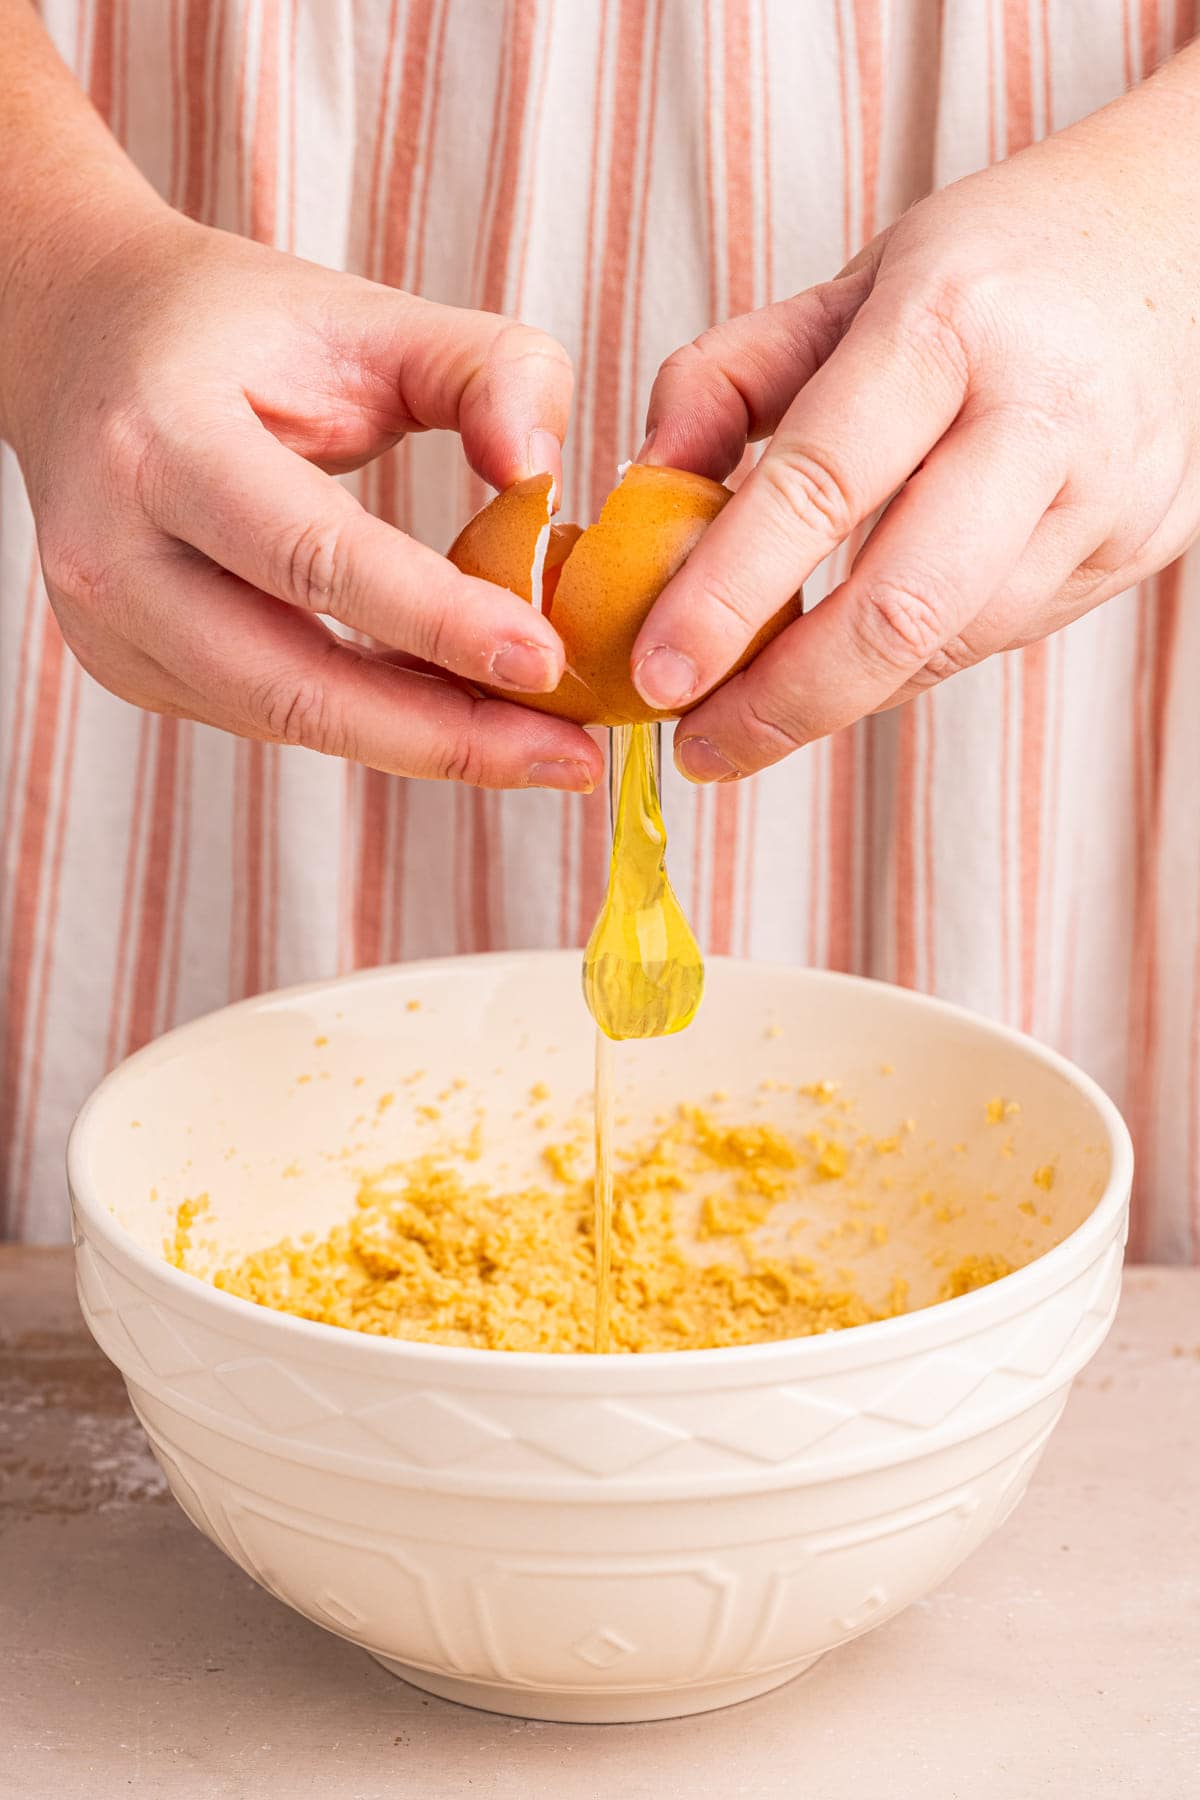 Cracking an egg into a large mixing bowl with cookie dough.